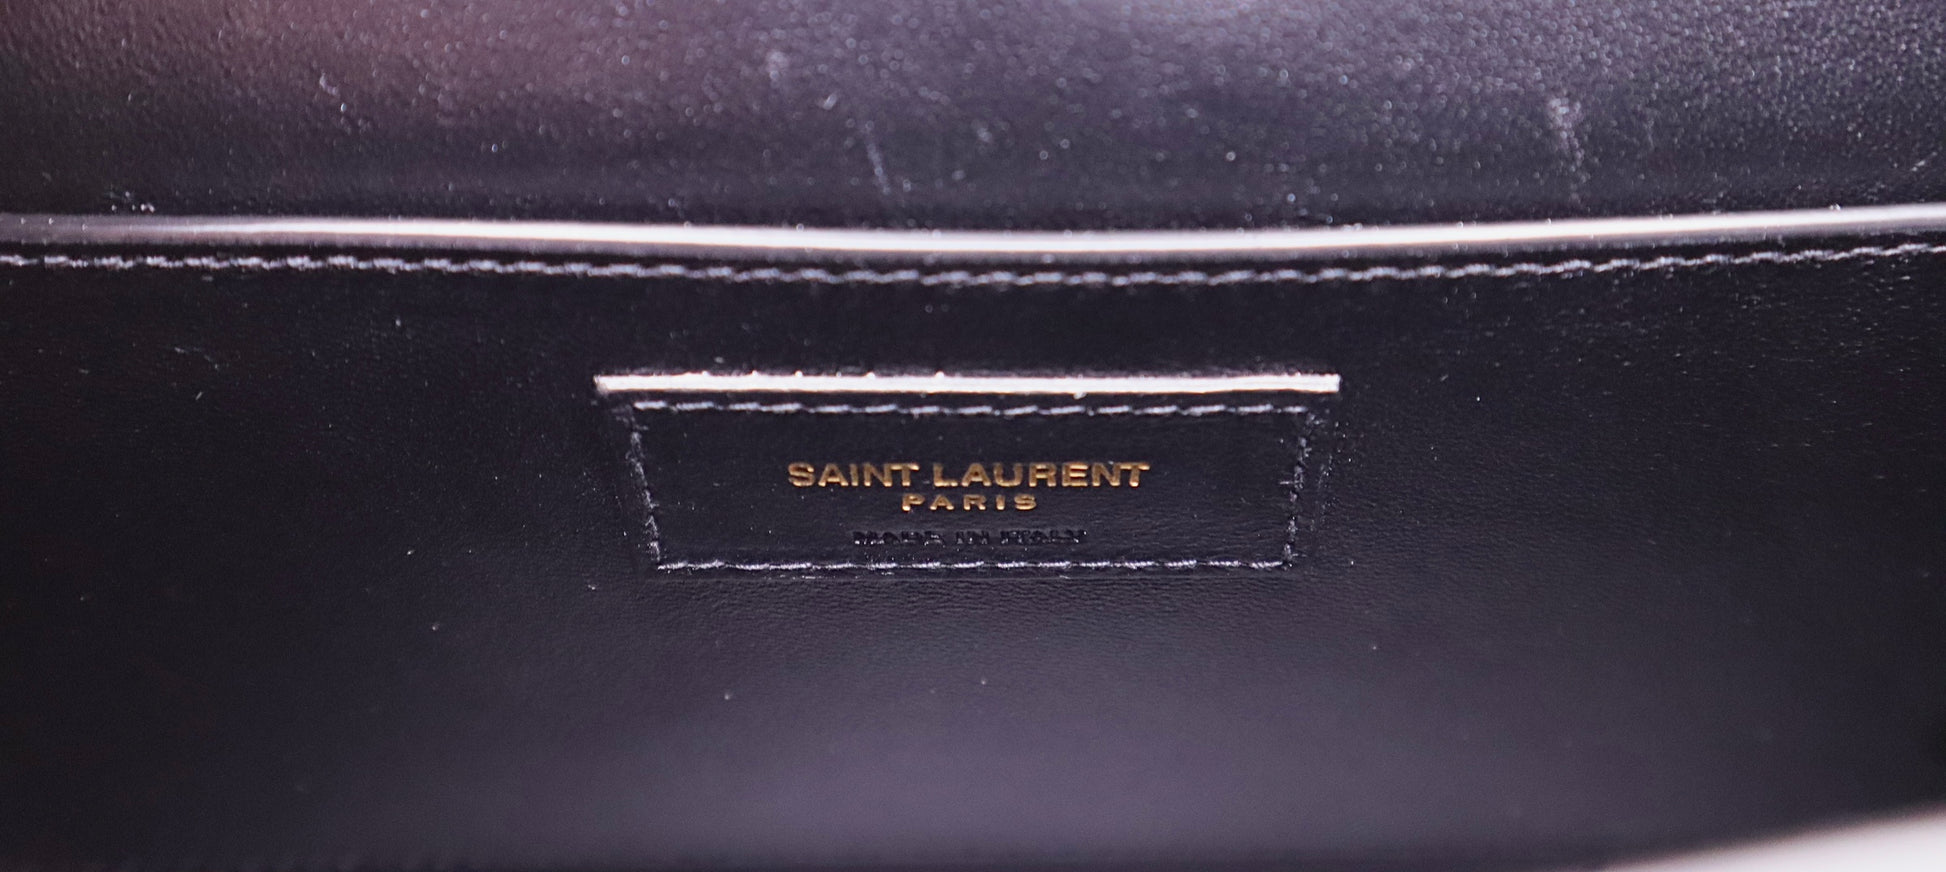 Saint laurent leather logo on inside with scuff marks above.